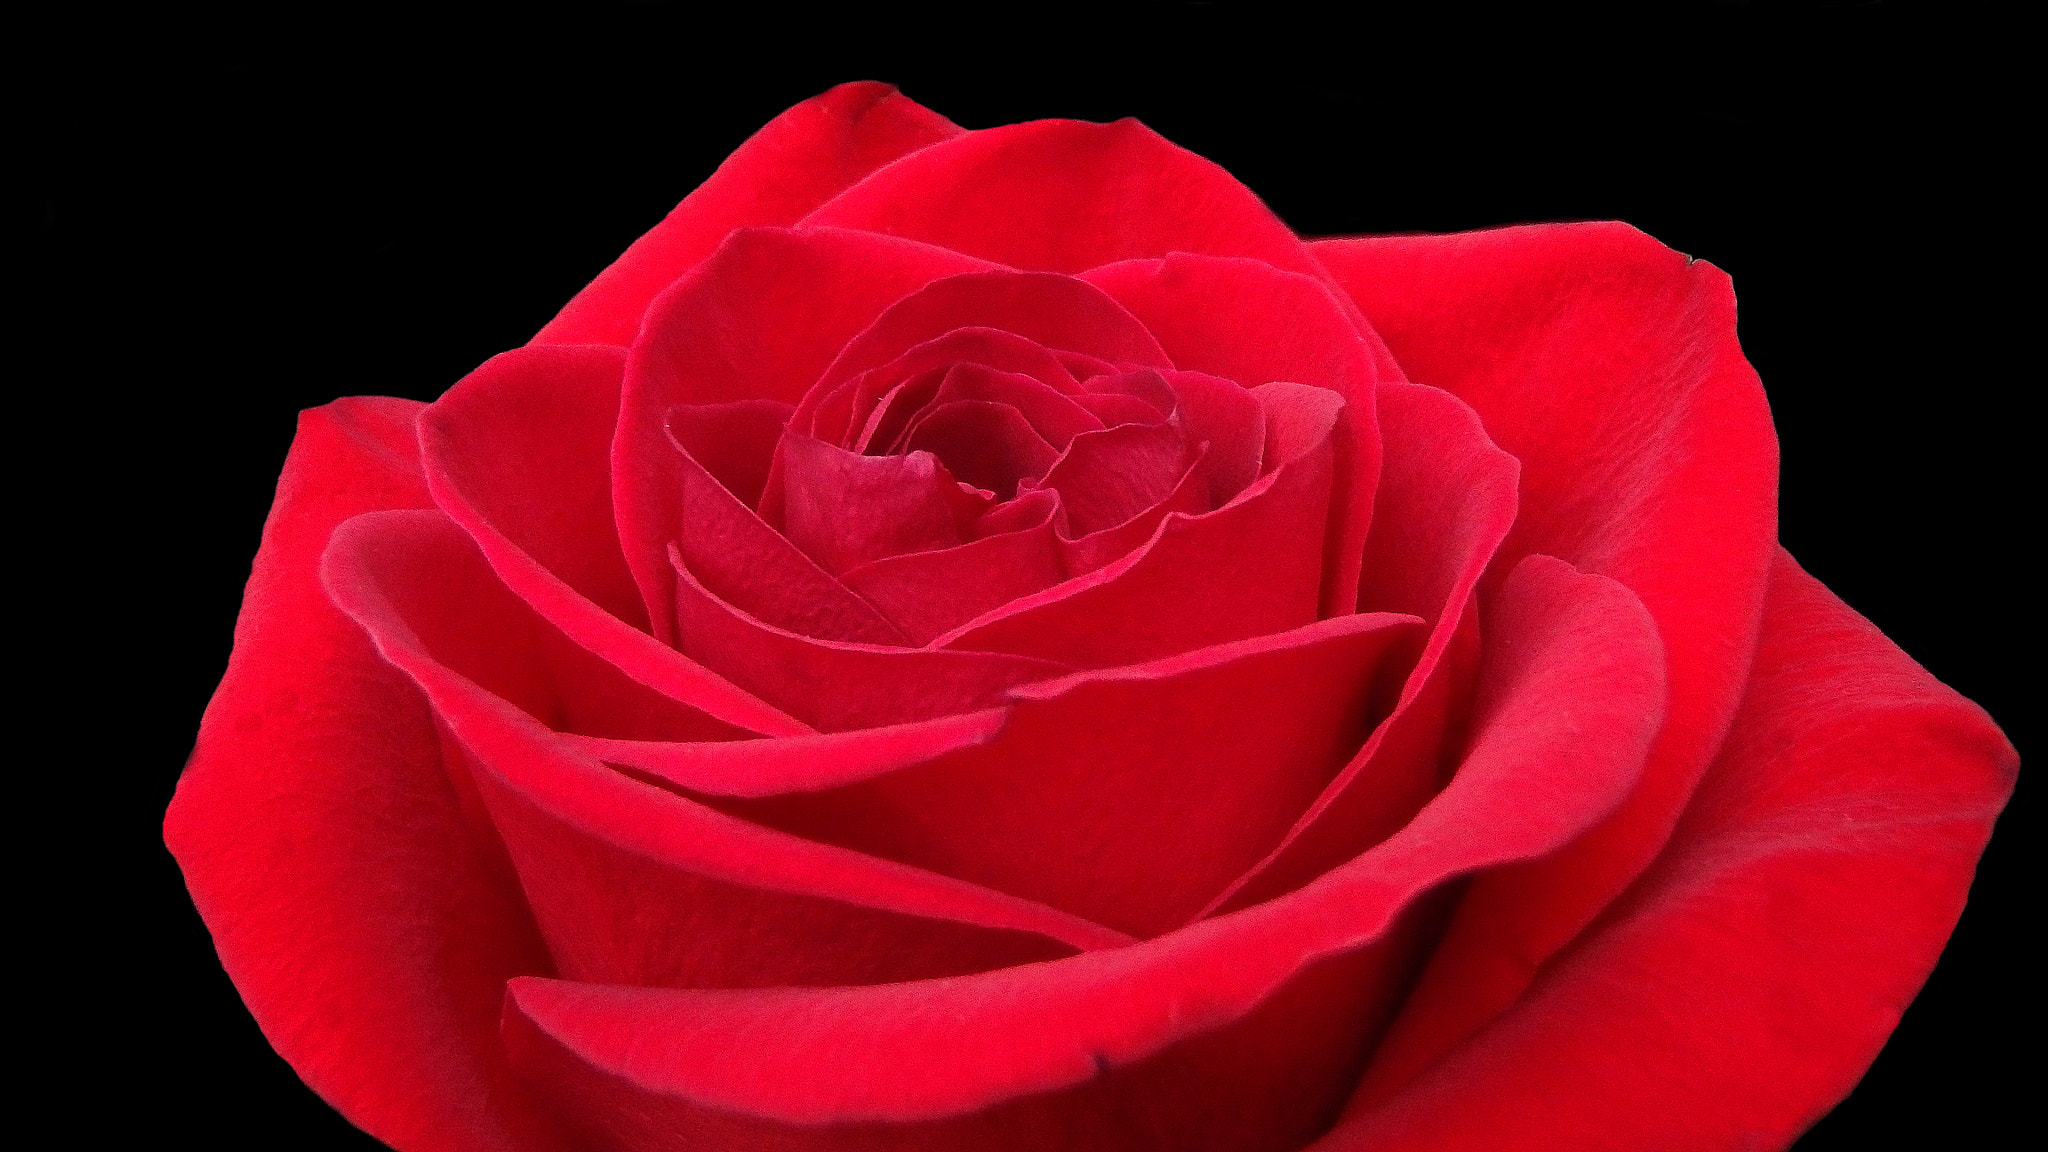 Olympus TG-830 sample photo. The red rose, a symbol of love. photography